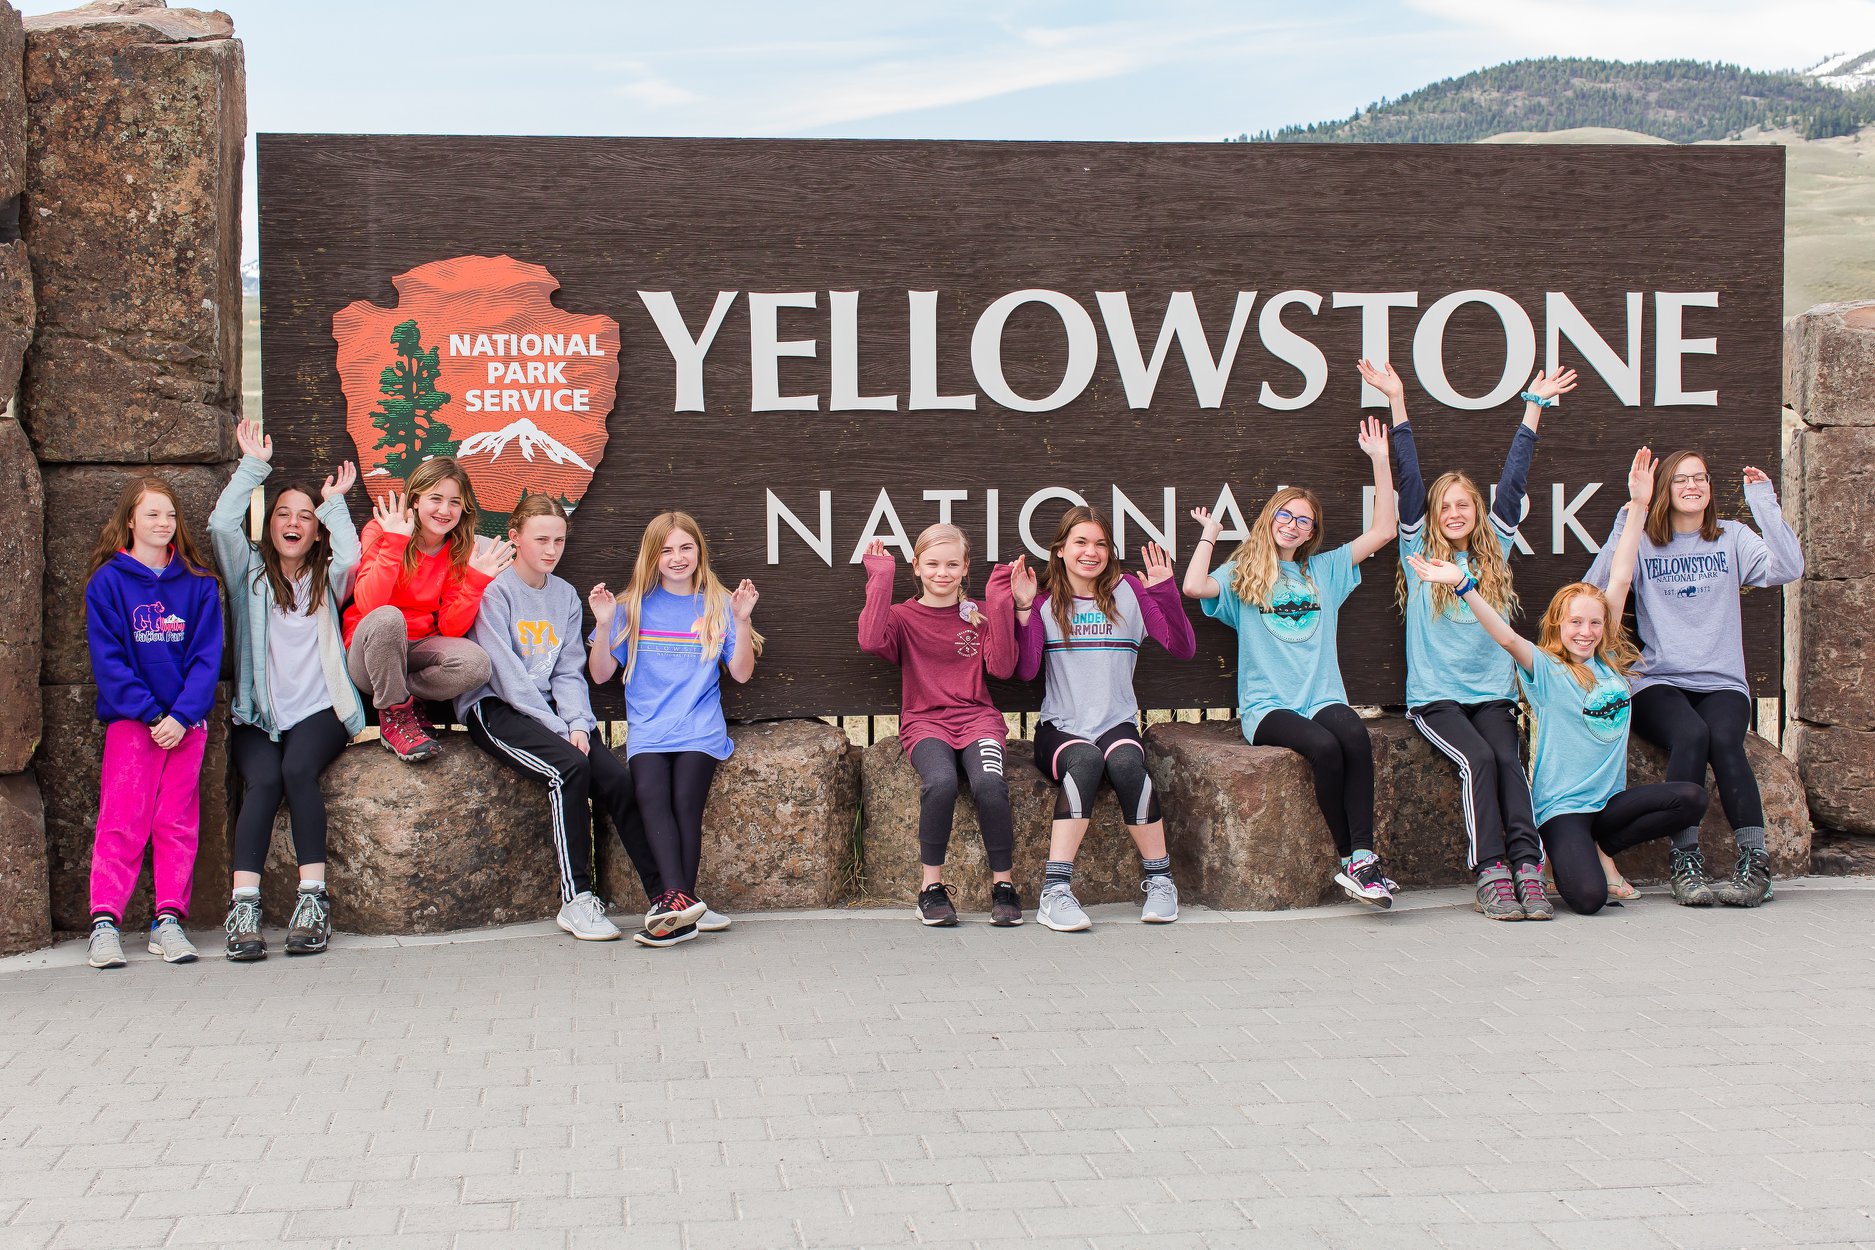 youth educational adventures members posing together in front of the yellowstone national park sign